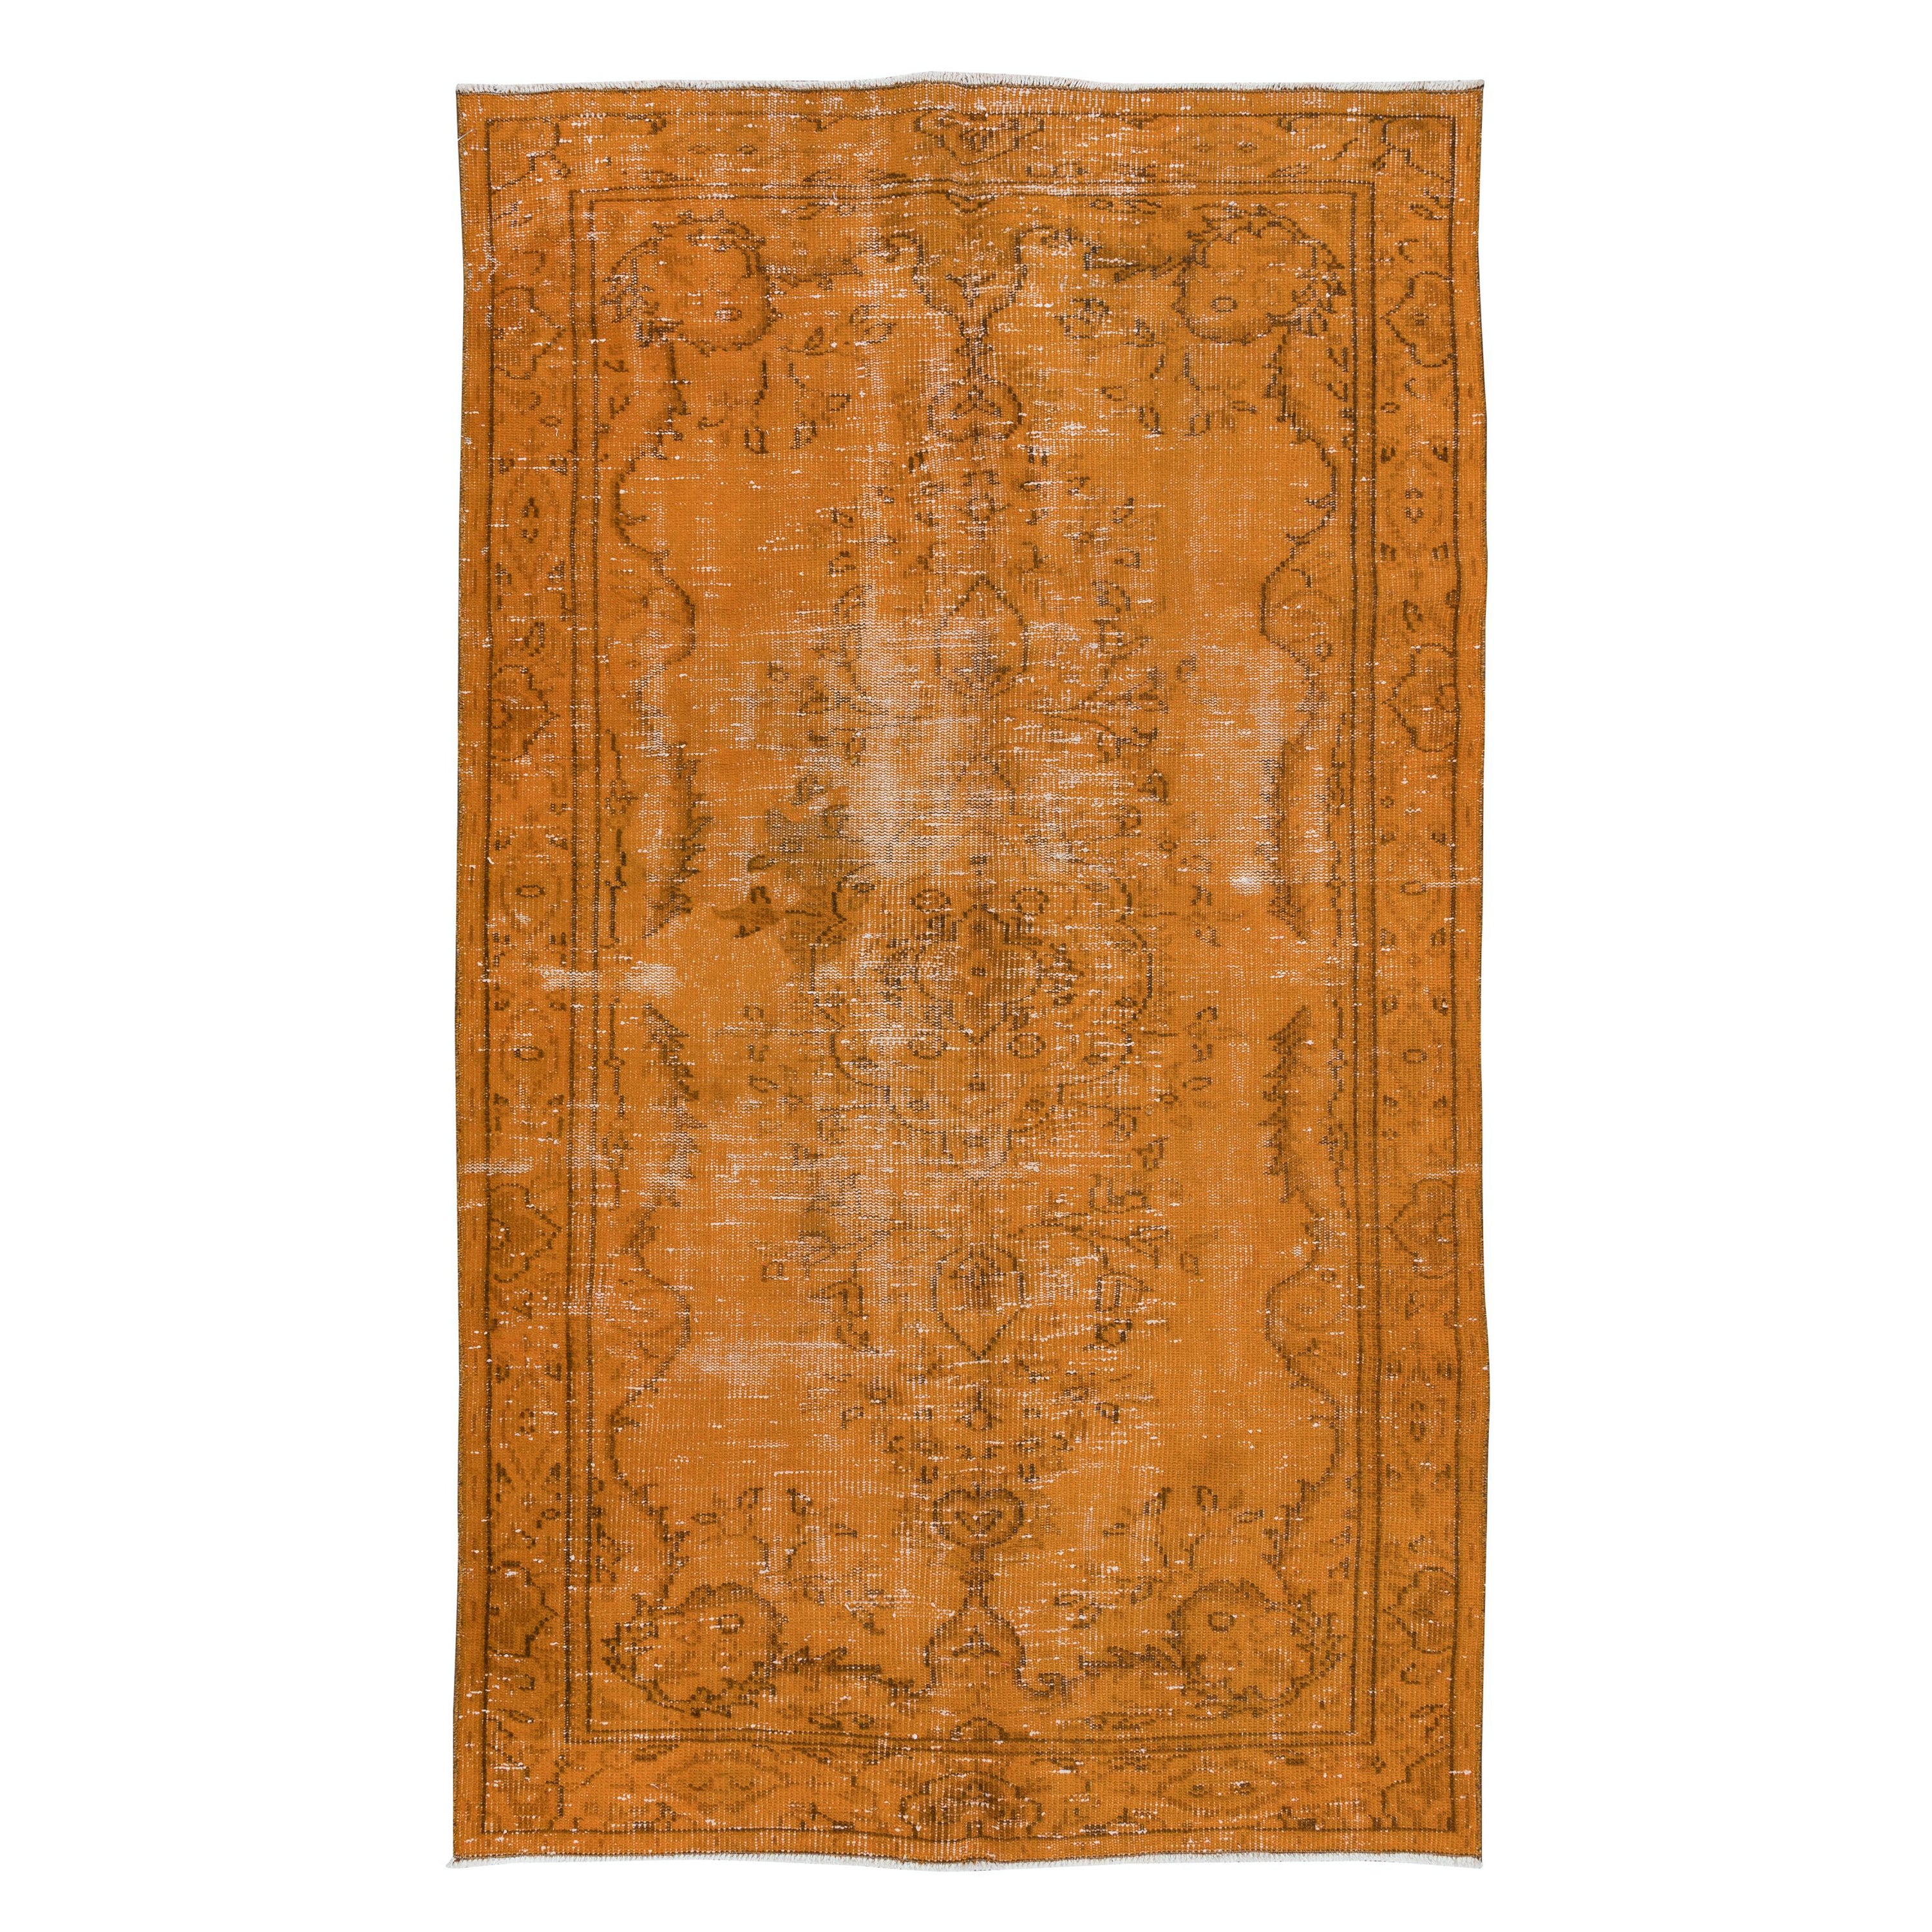 4.5x7.7 Ft Vintage Orange Area Rug, Handwoven and Handknotted in Turkey For Sale